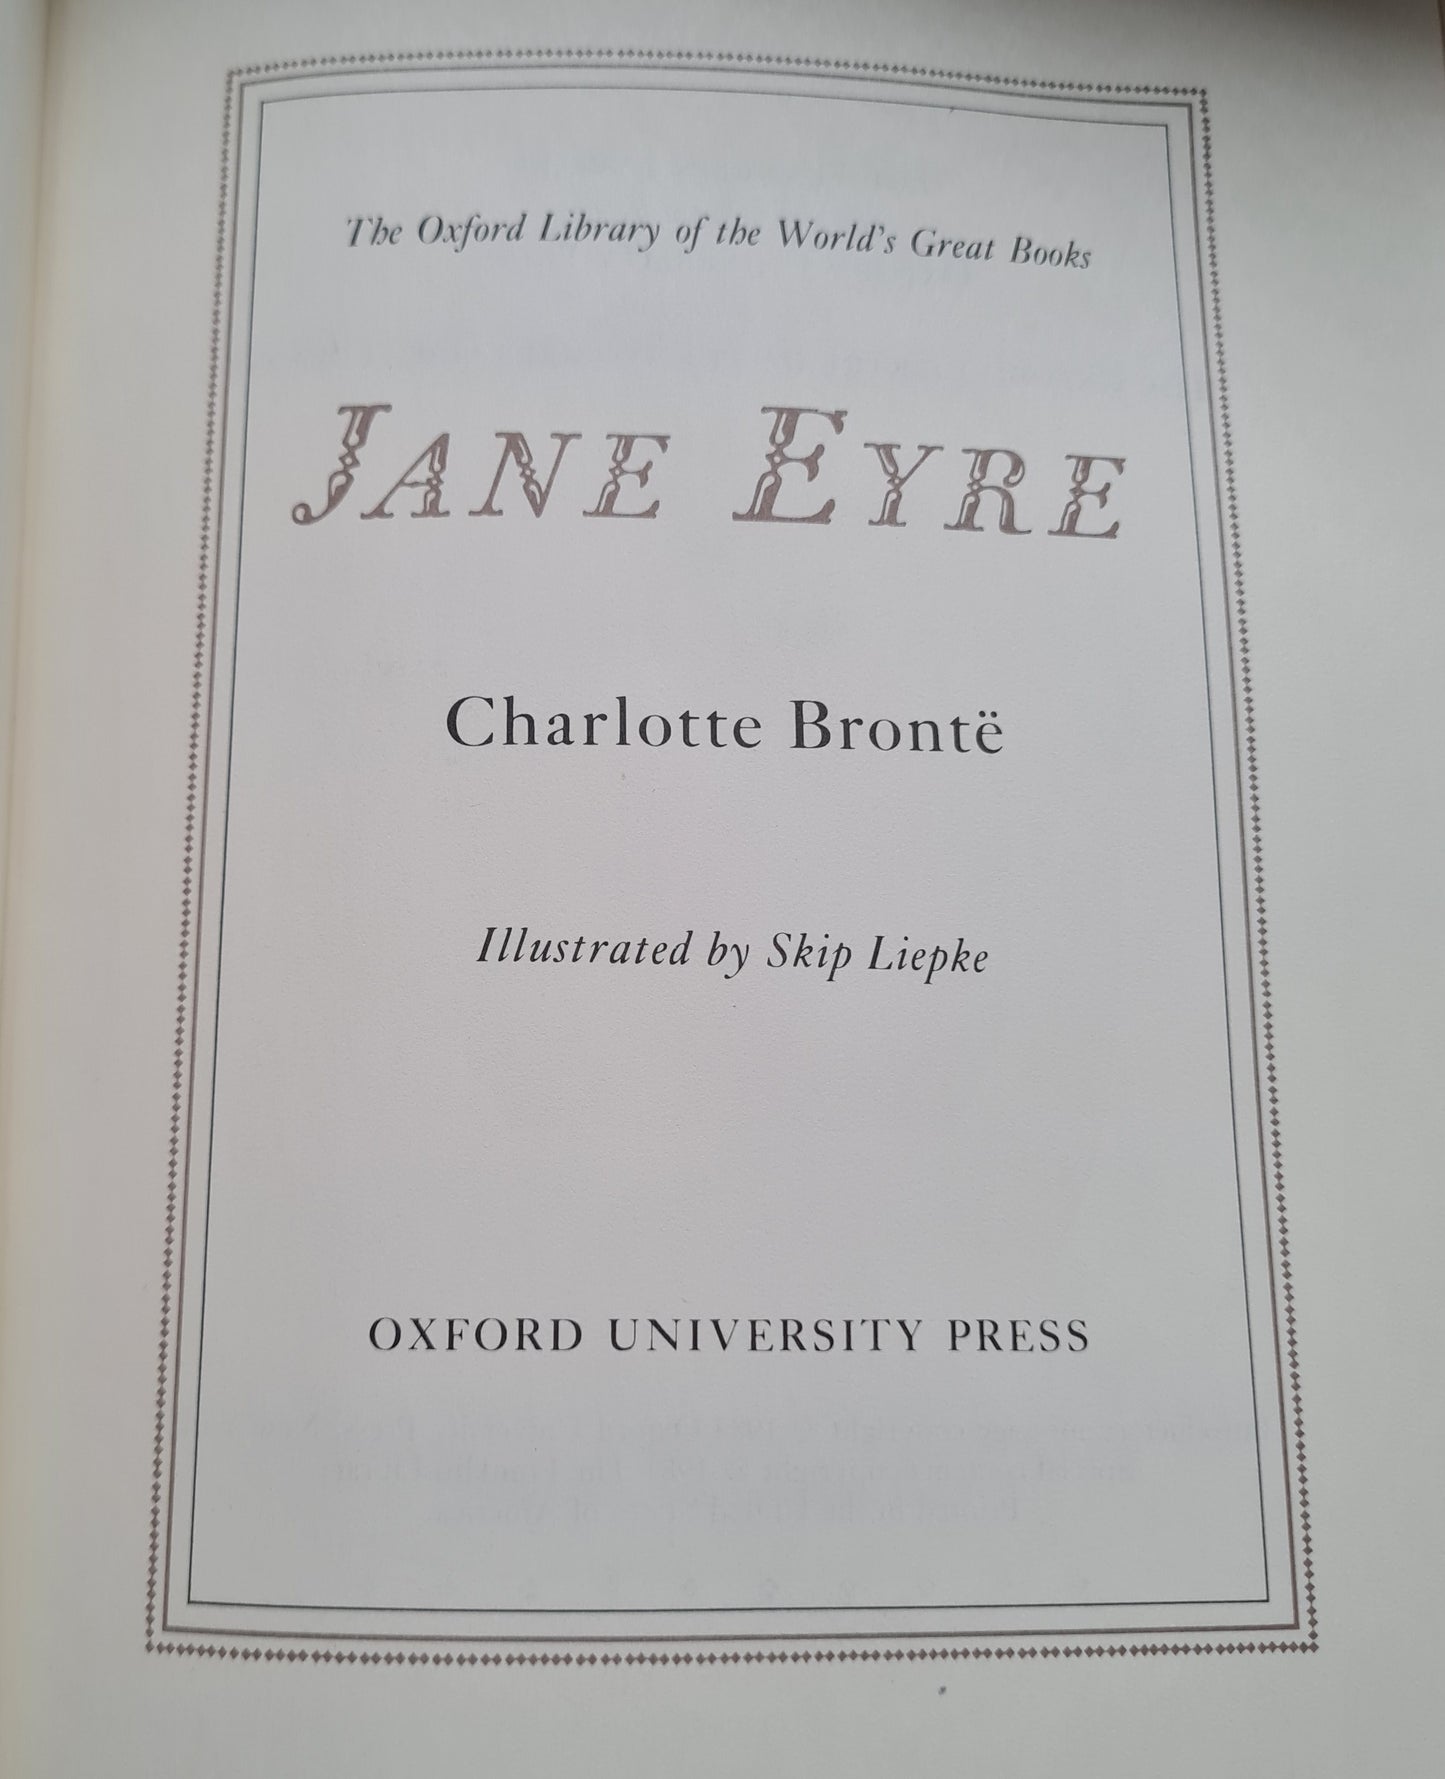 Jane Eyre by Charlotte Bronte / Extremely Rare Limited Edition / Quarter Dark Red Leather Bound / 22ct Gold Accent Decoration / Illustrated